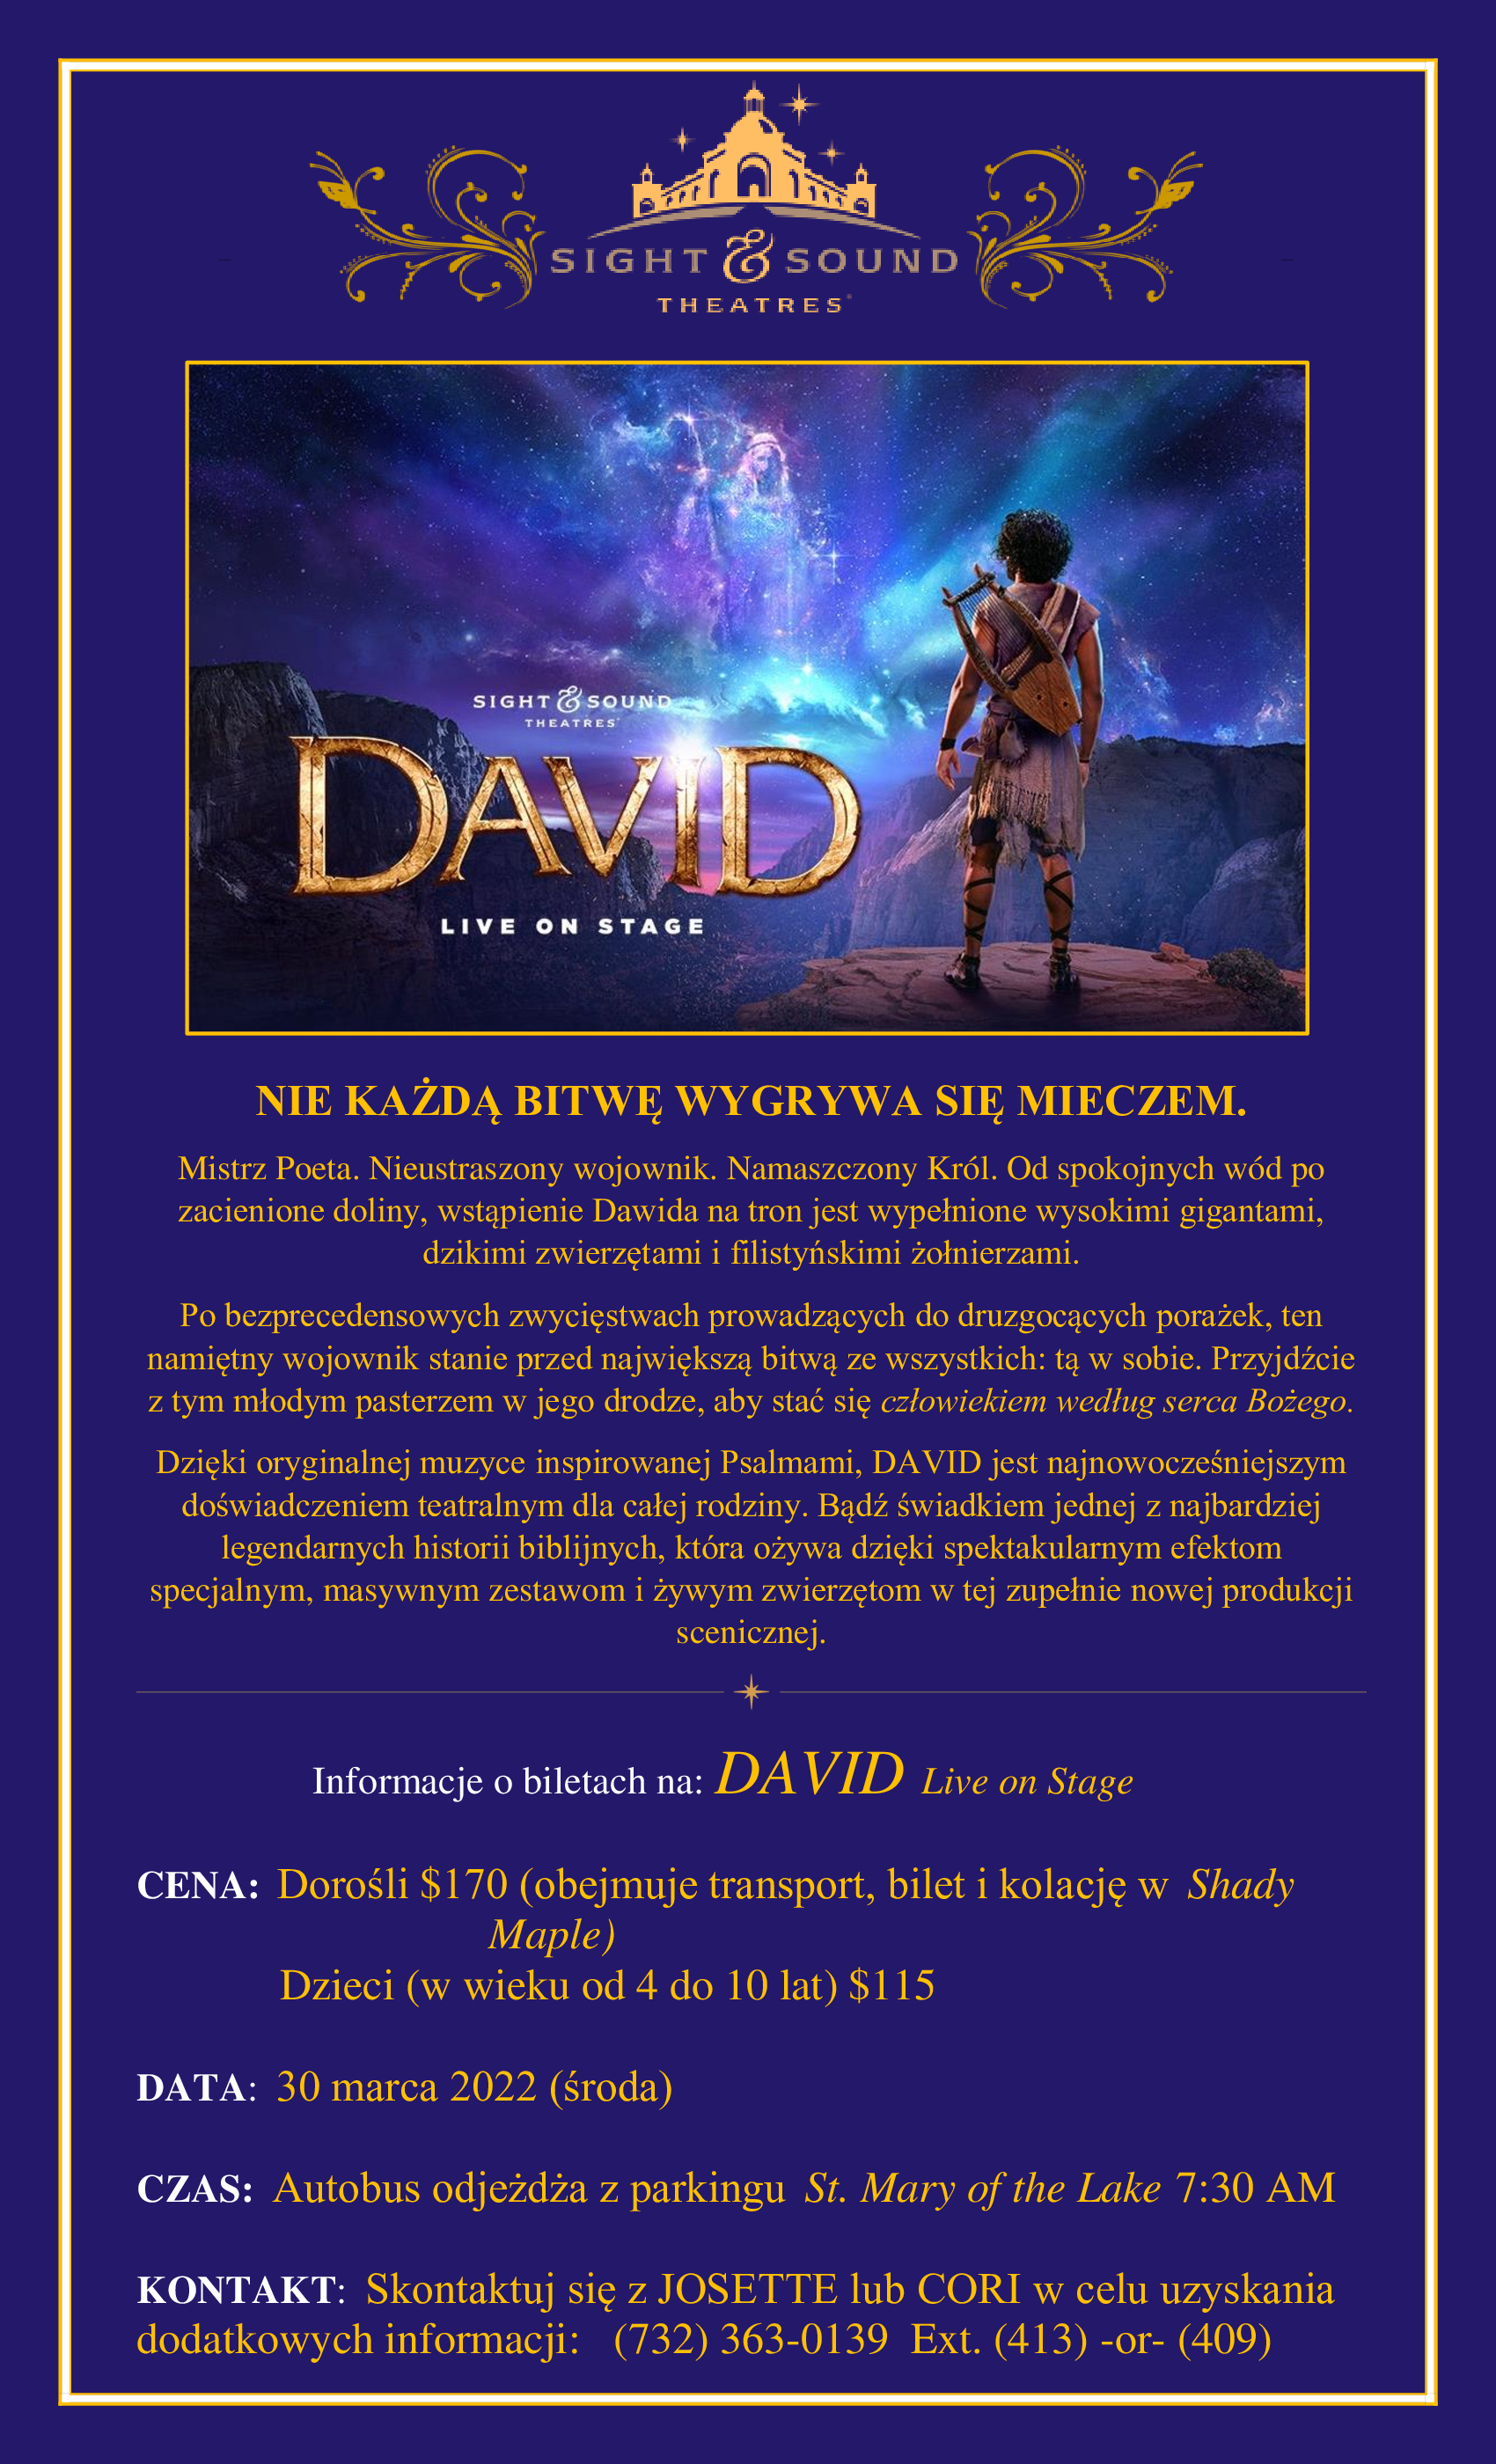 DAVID s s theater flyer POLISH with contact